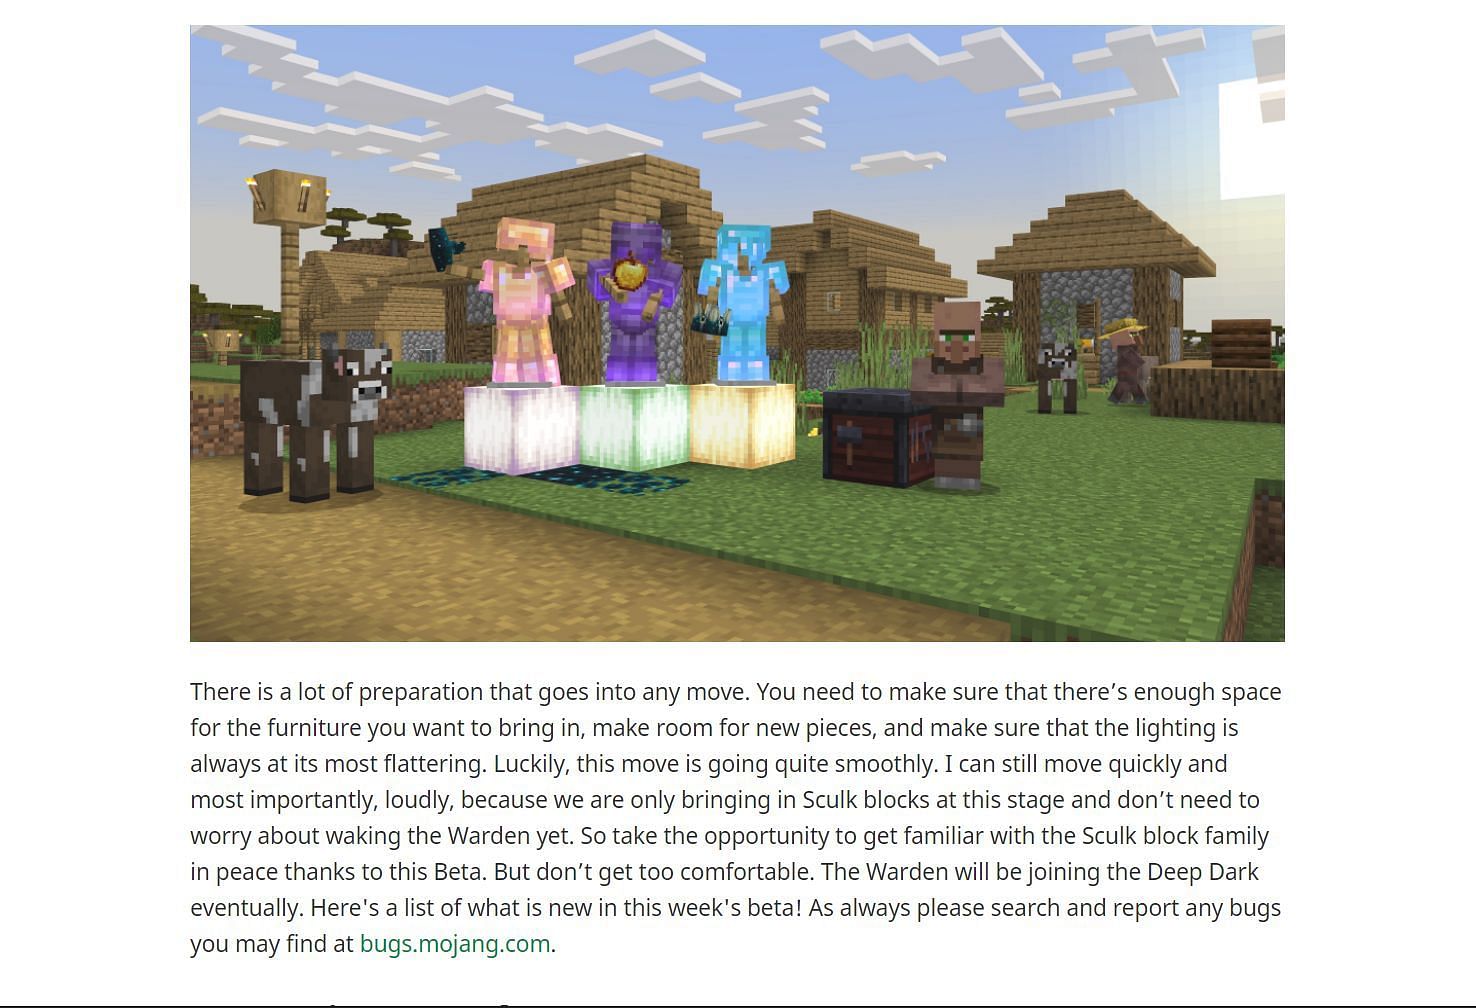 Official statement from Mojang on the new mob coming to Bedrock Edition (Image via Sportskeeda)